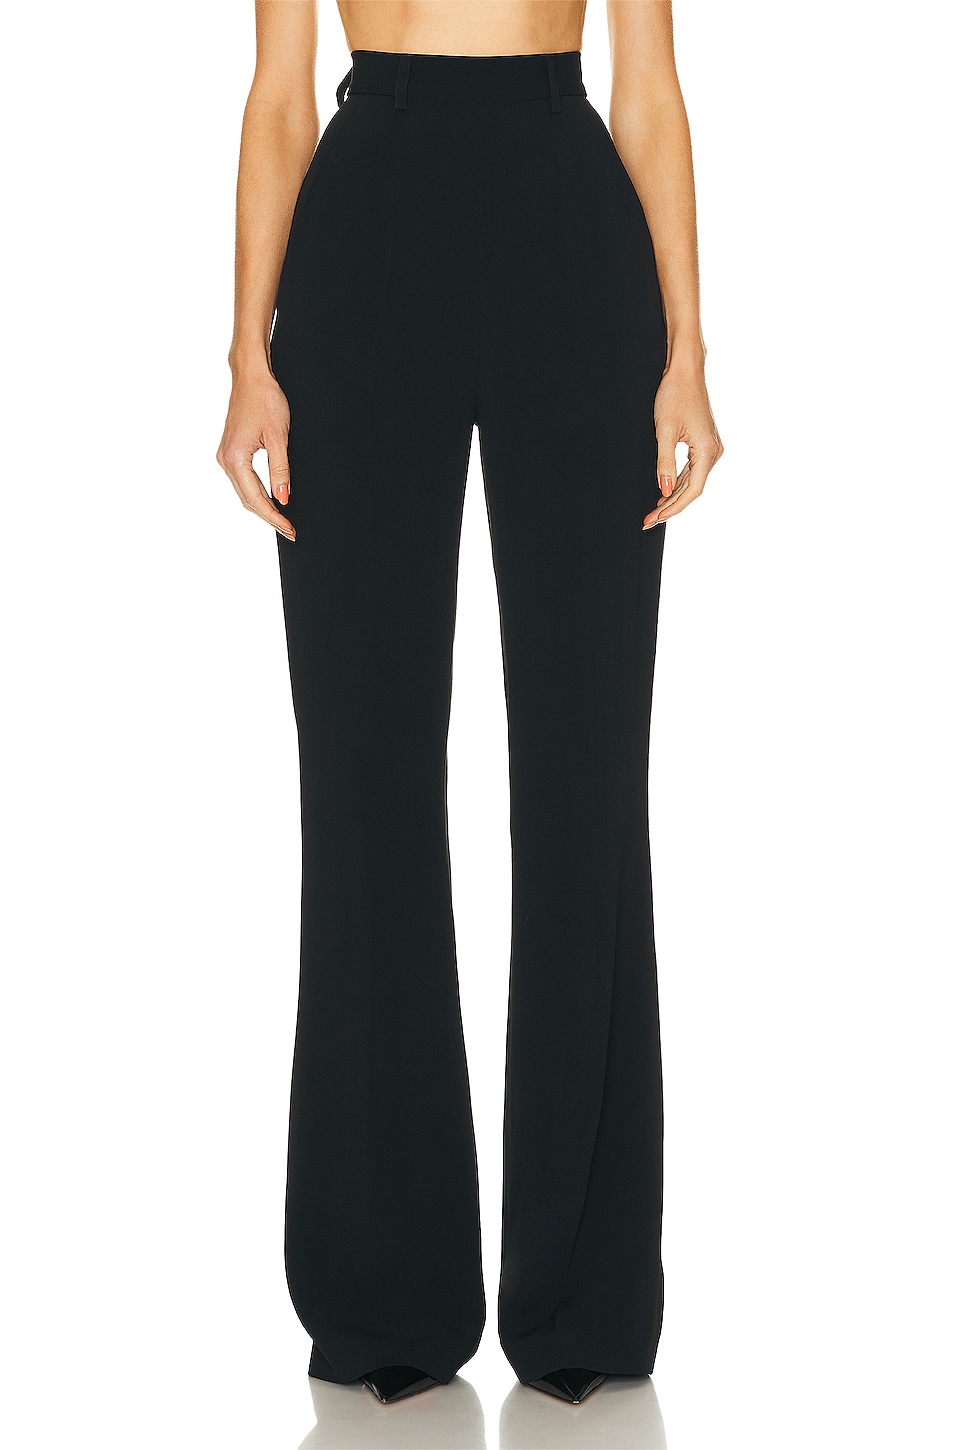 Image 1 of David Koma Crystal Lip Embroidered Detail Trouser in Black